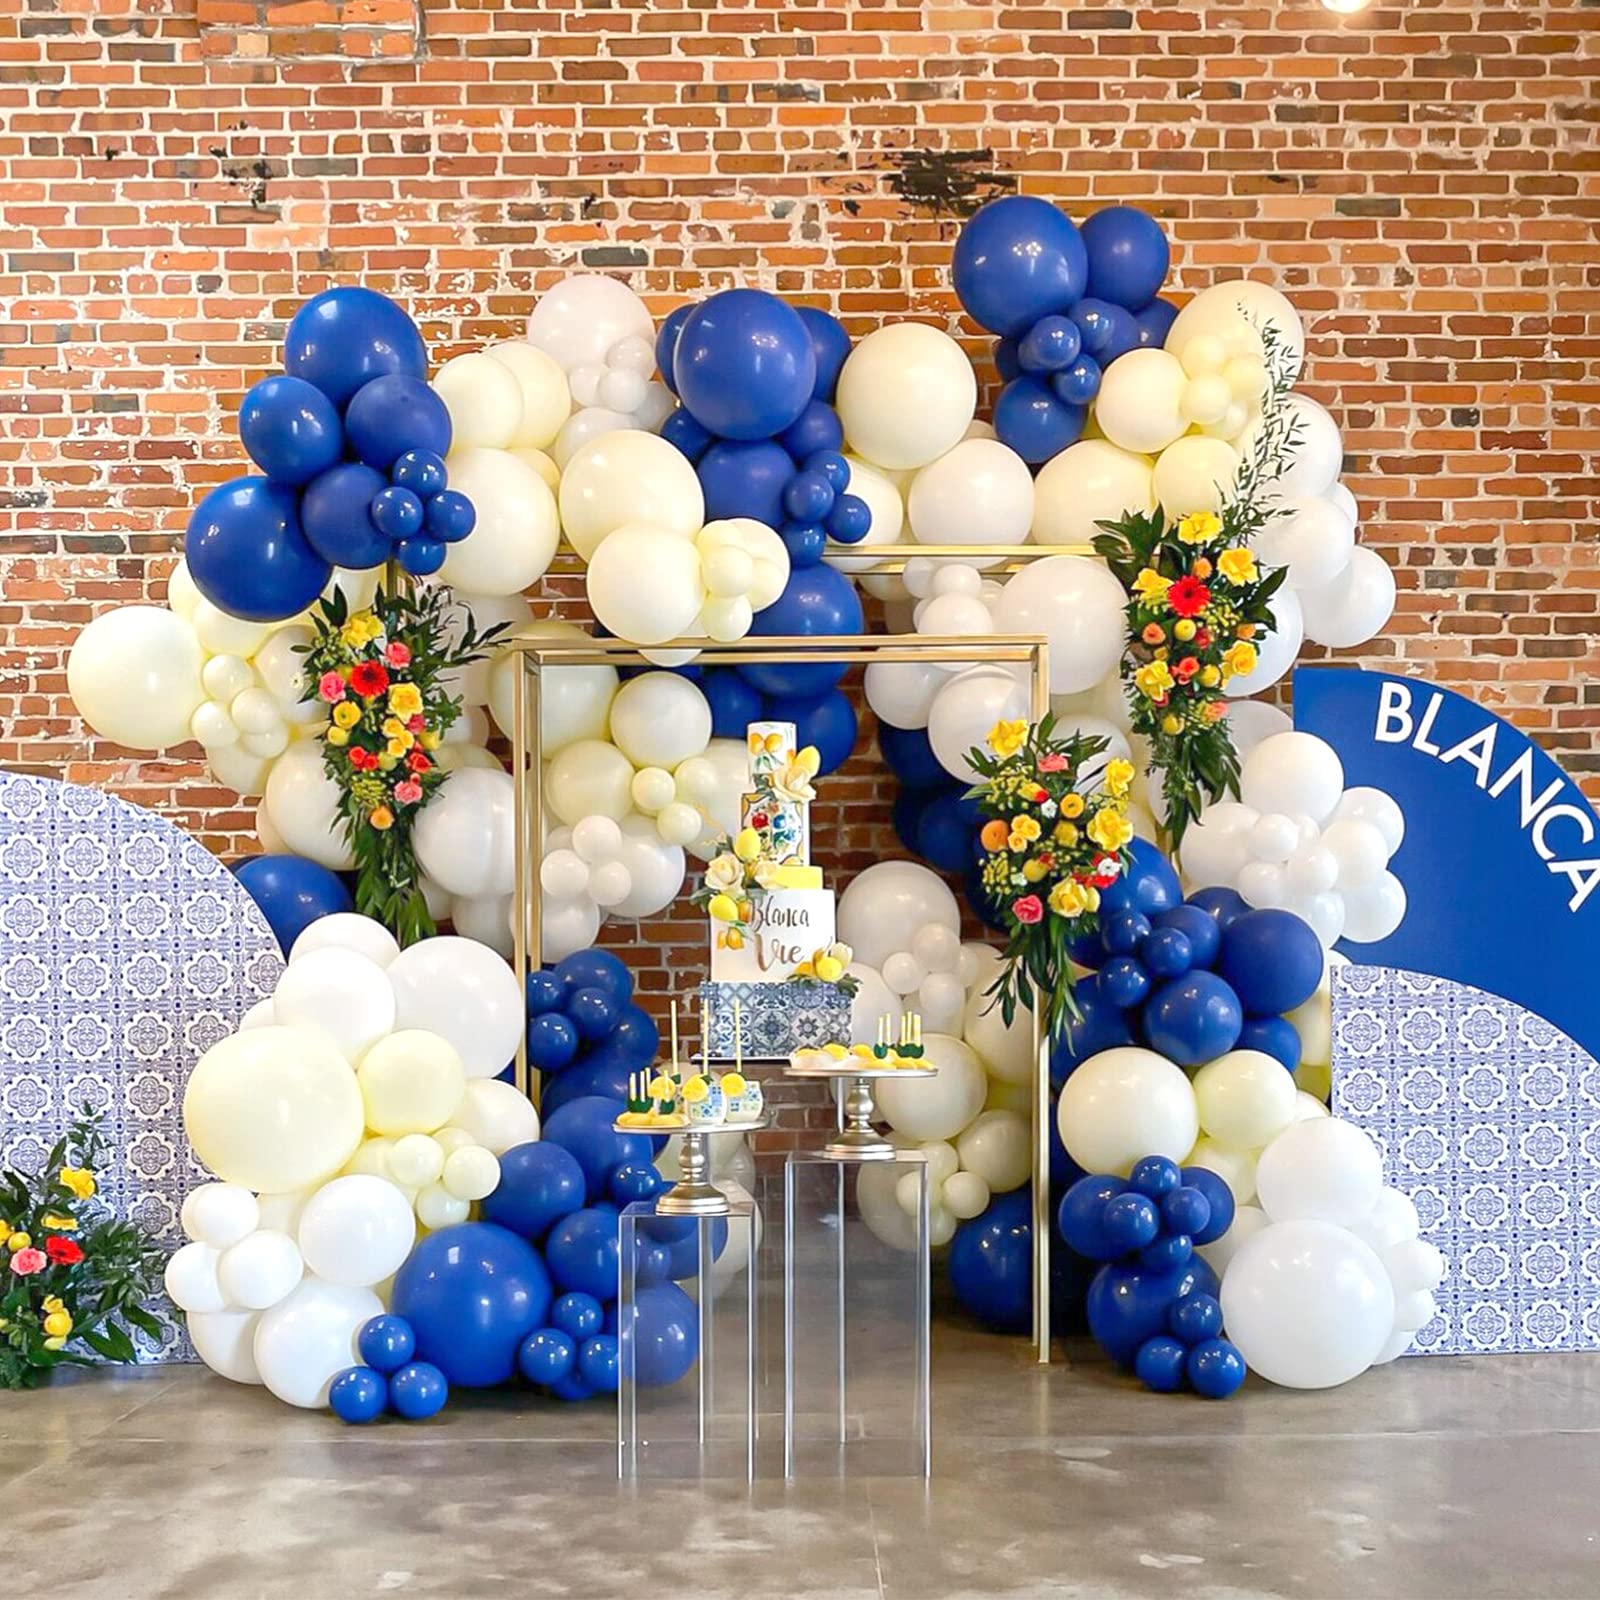 RUBFAC 129pcs Royal Blue and White Balloons Different Sizes 18 12 10 5 Inch for Garland Arch, for Birthday Party Graduation Wedding Baby Shower Baseball Nautical Party Decoration